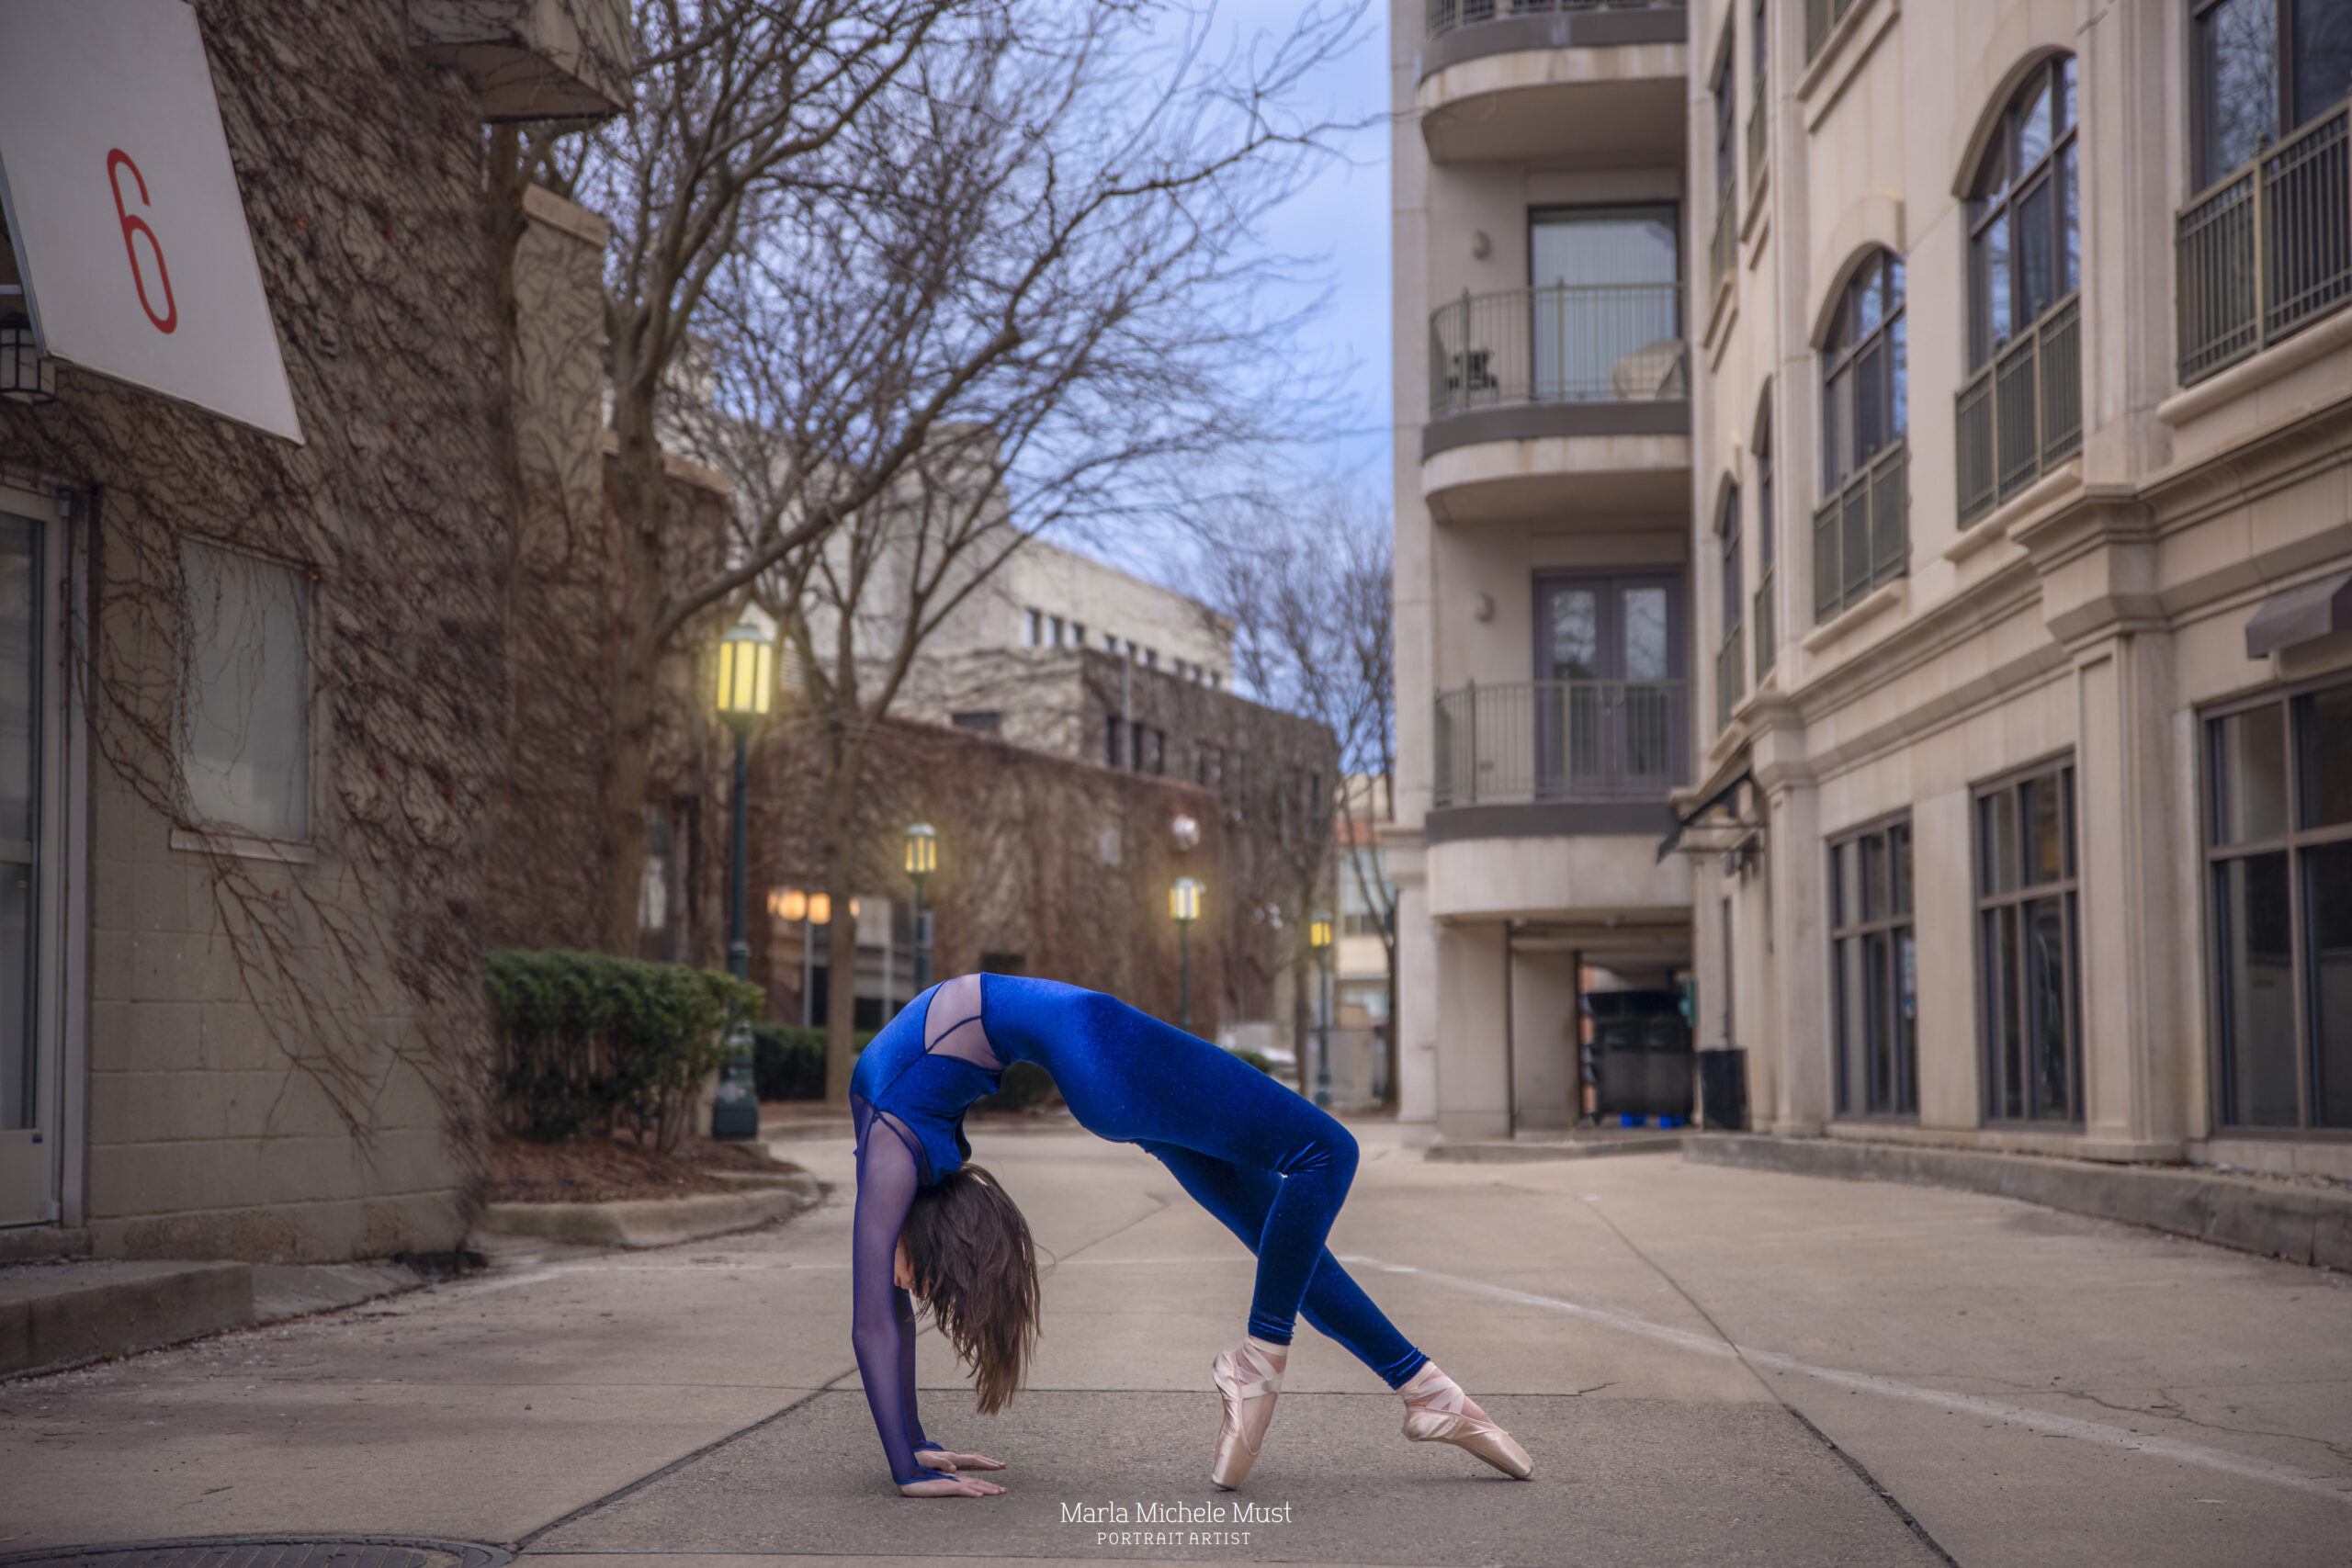 Detroit-based dance photoshoot of a ballerina wearing vibrant blue and pointe shoes effortlessly bent over backwards in a display of skill, captured by Detroit dance photographer.